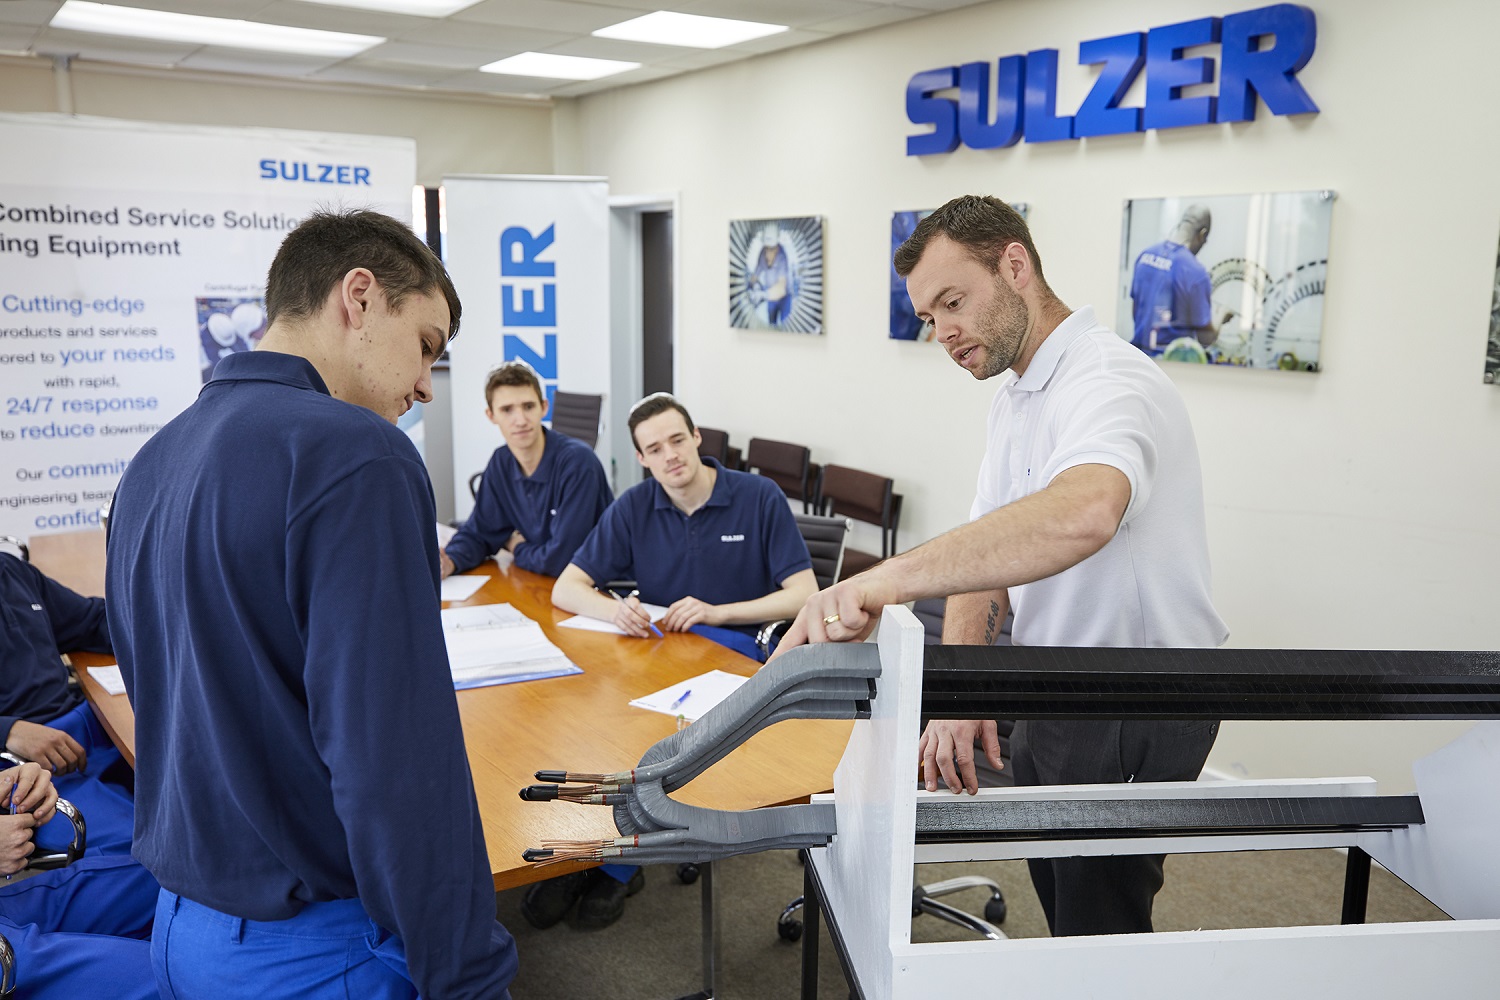 The training of new staff and apprentices is central to Sulzer retaining its knowledge and expertise.